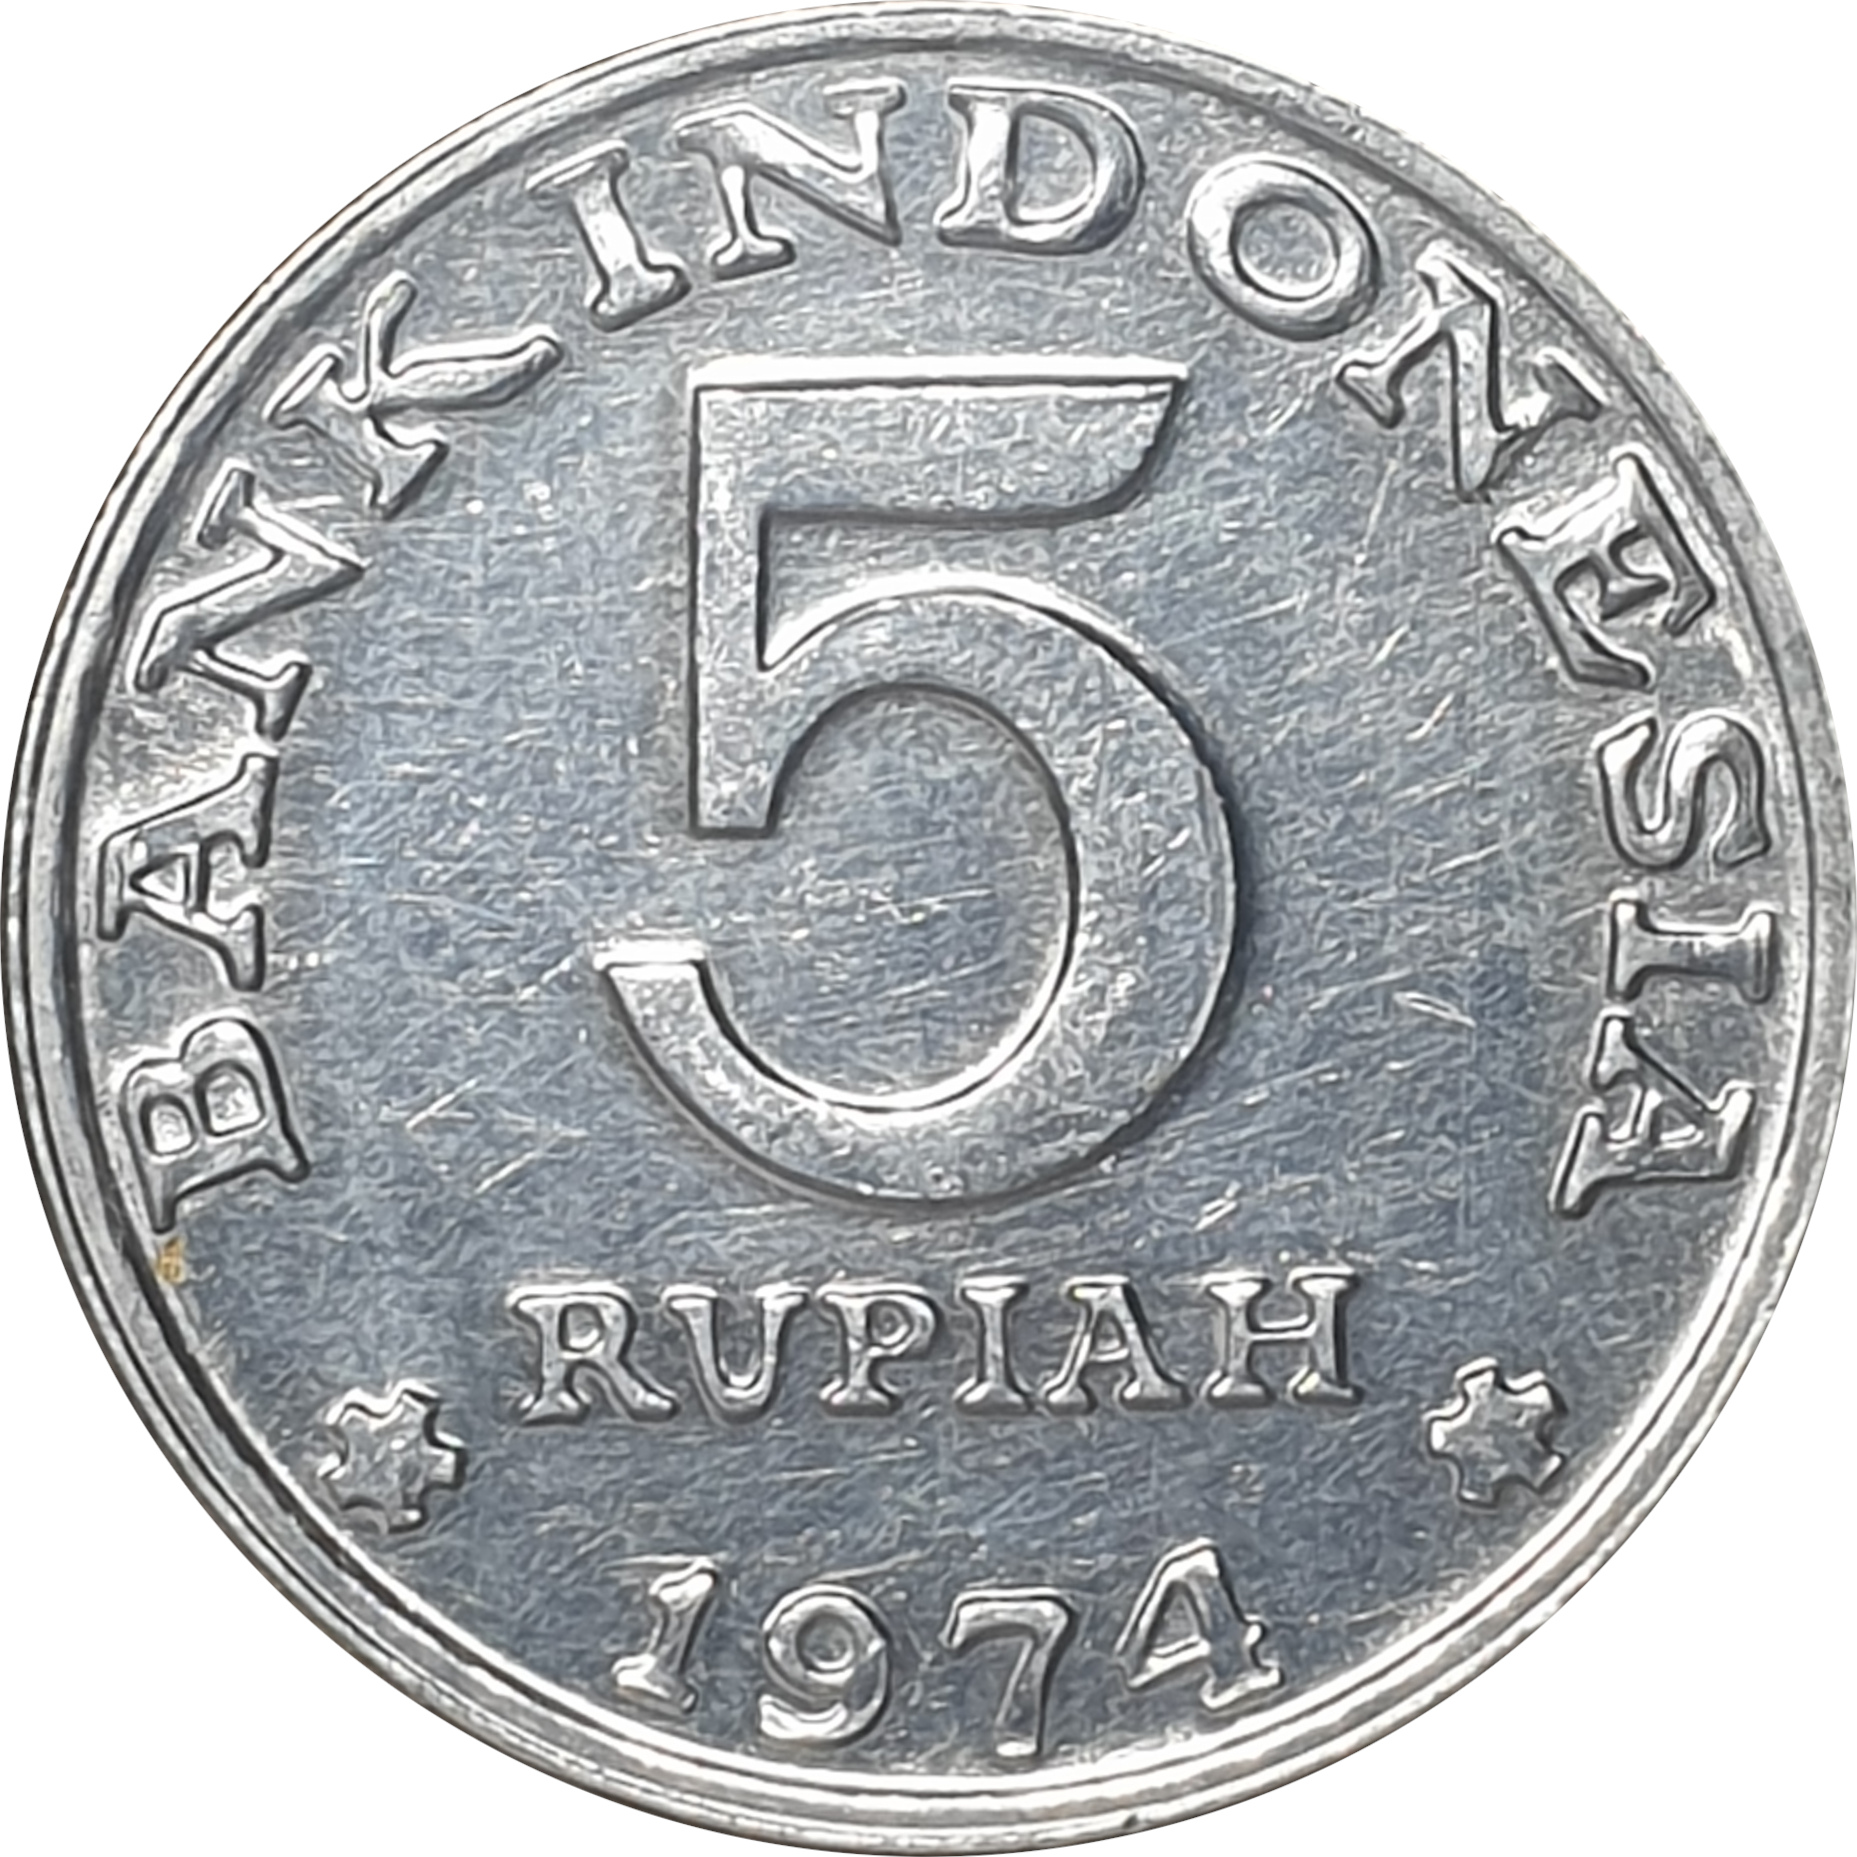 5 rupiah - Family - Largest